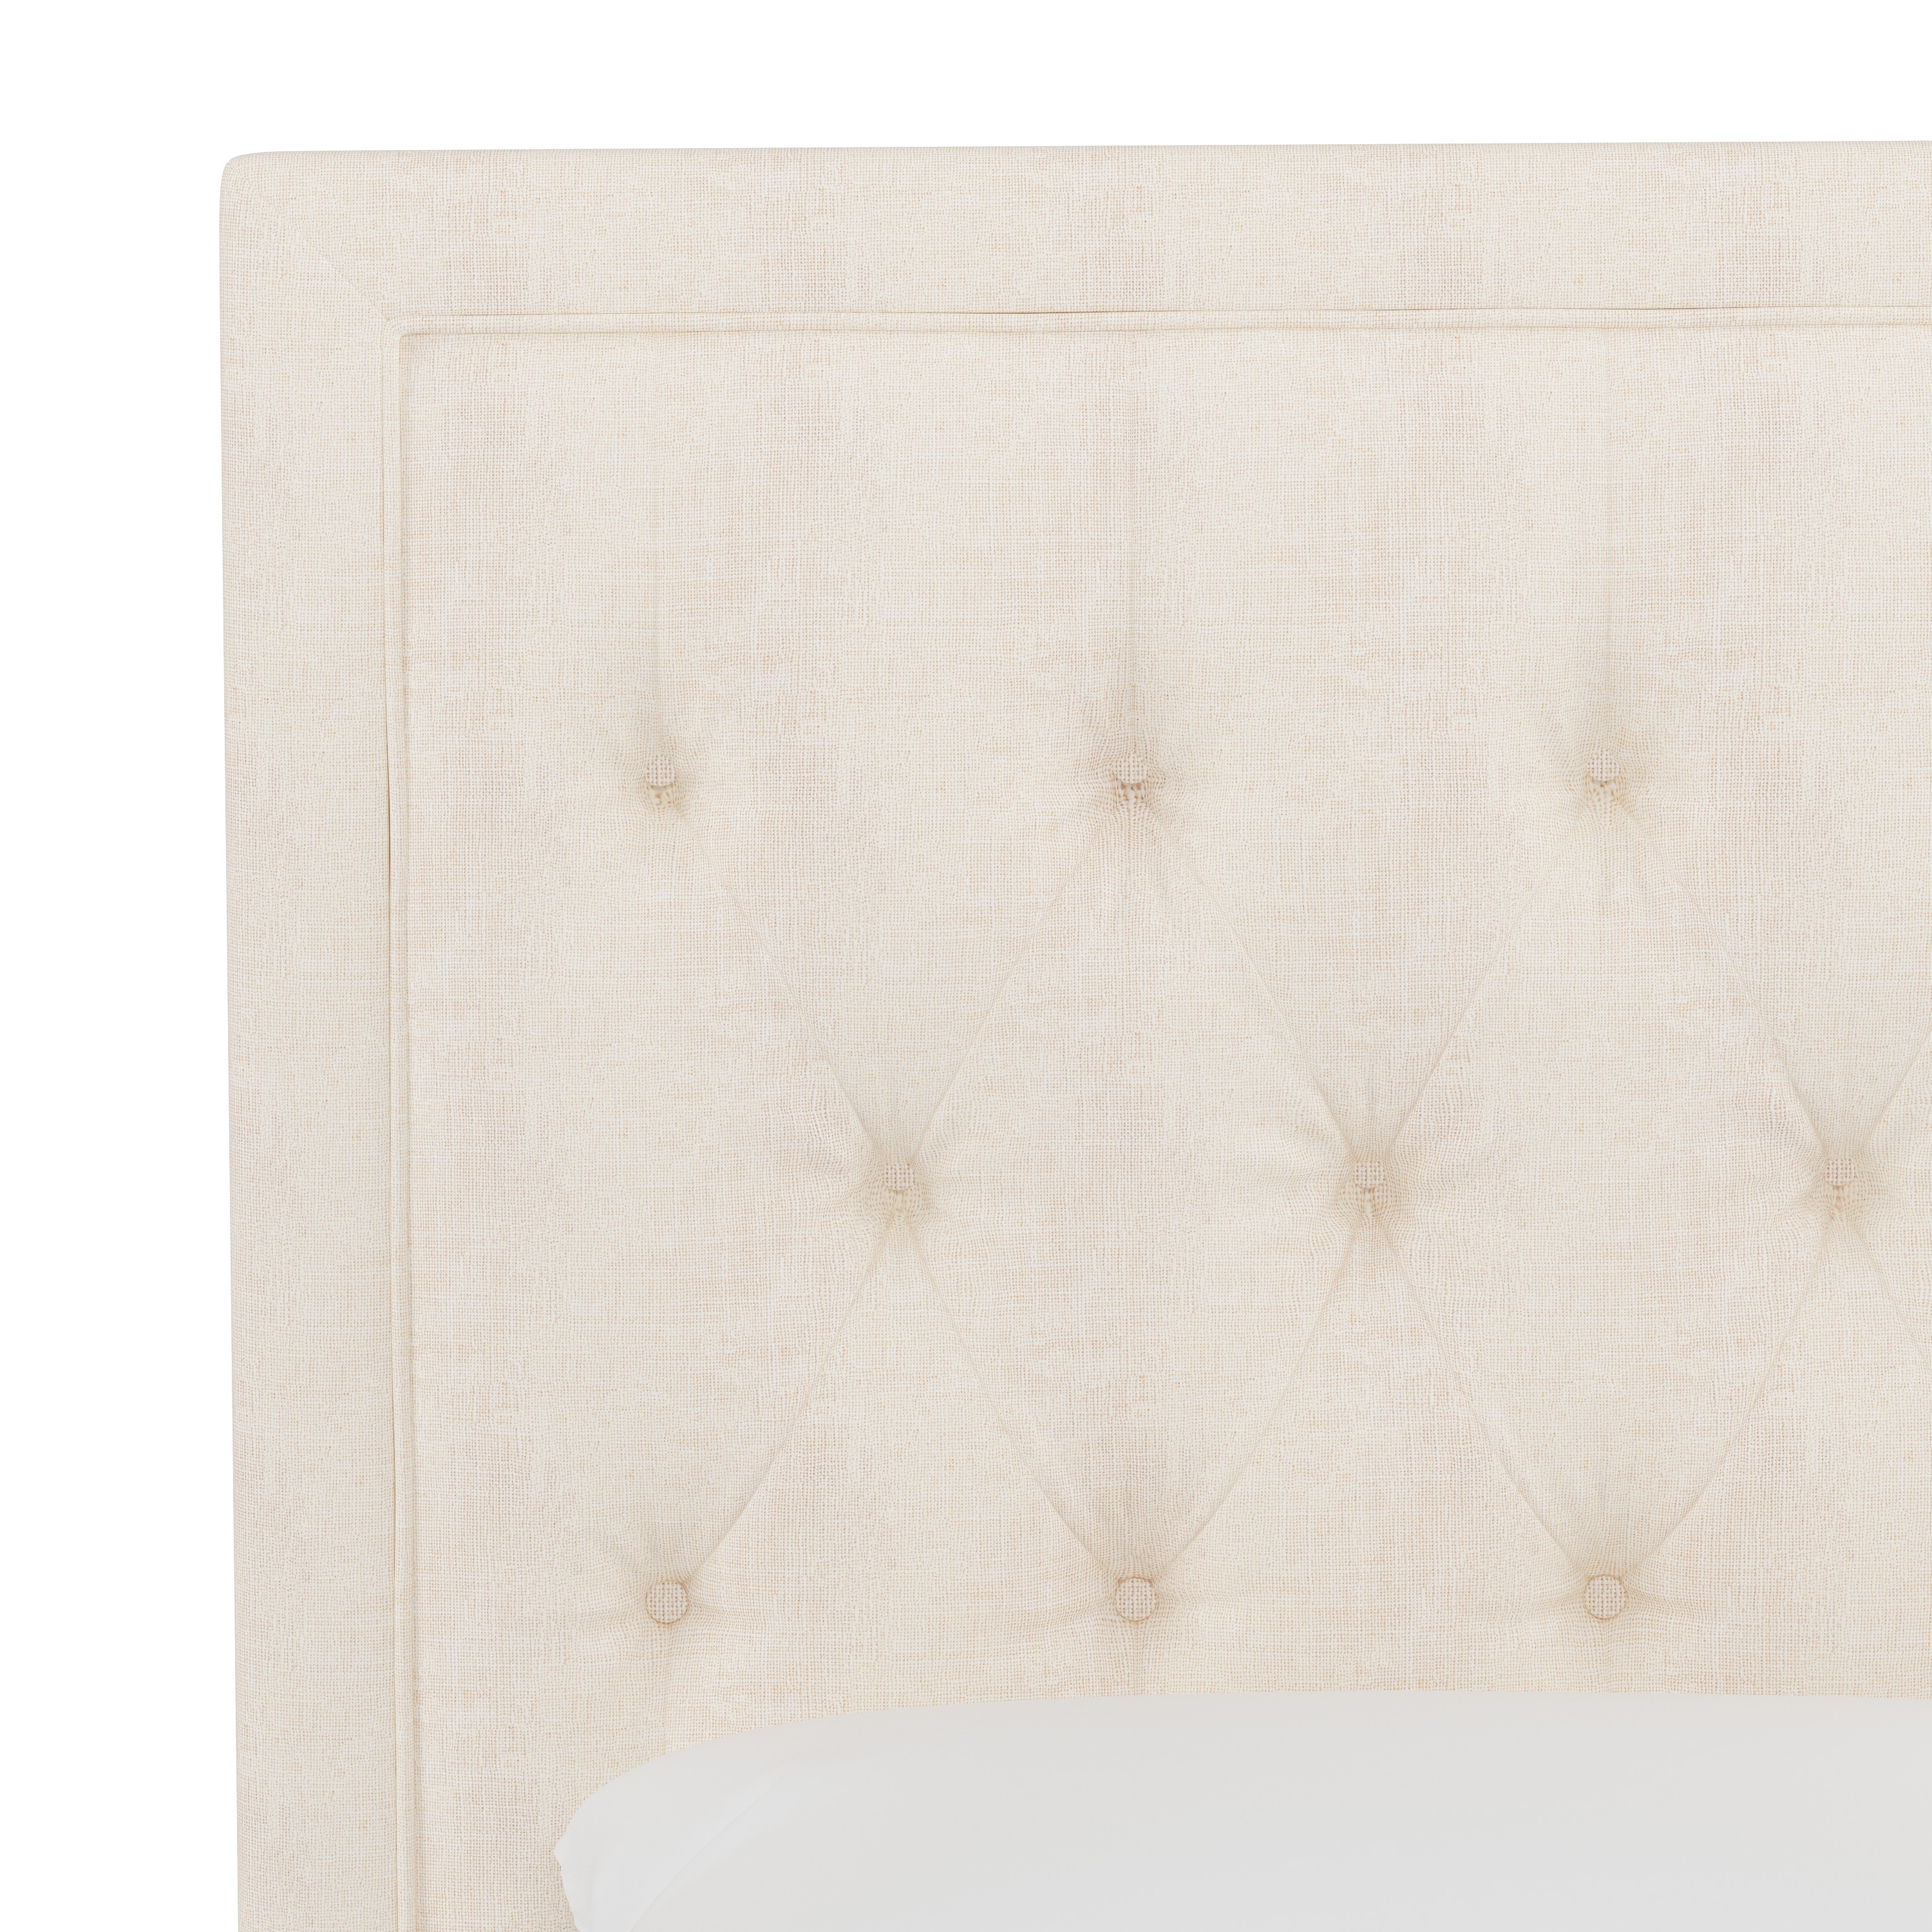 Lafayette Bed, Queen, White - Image 3